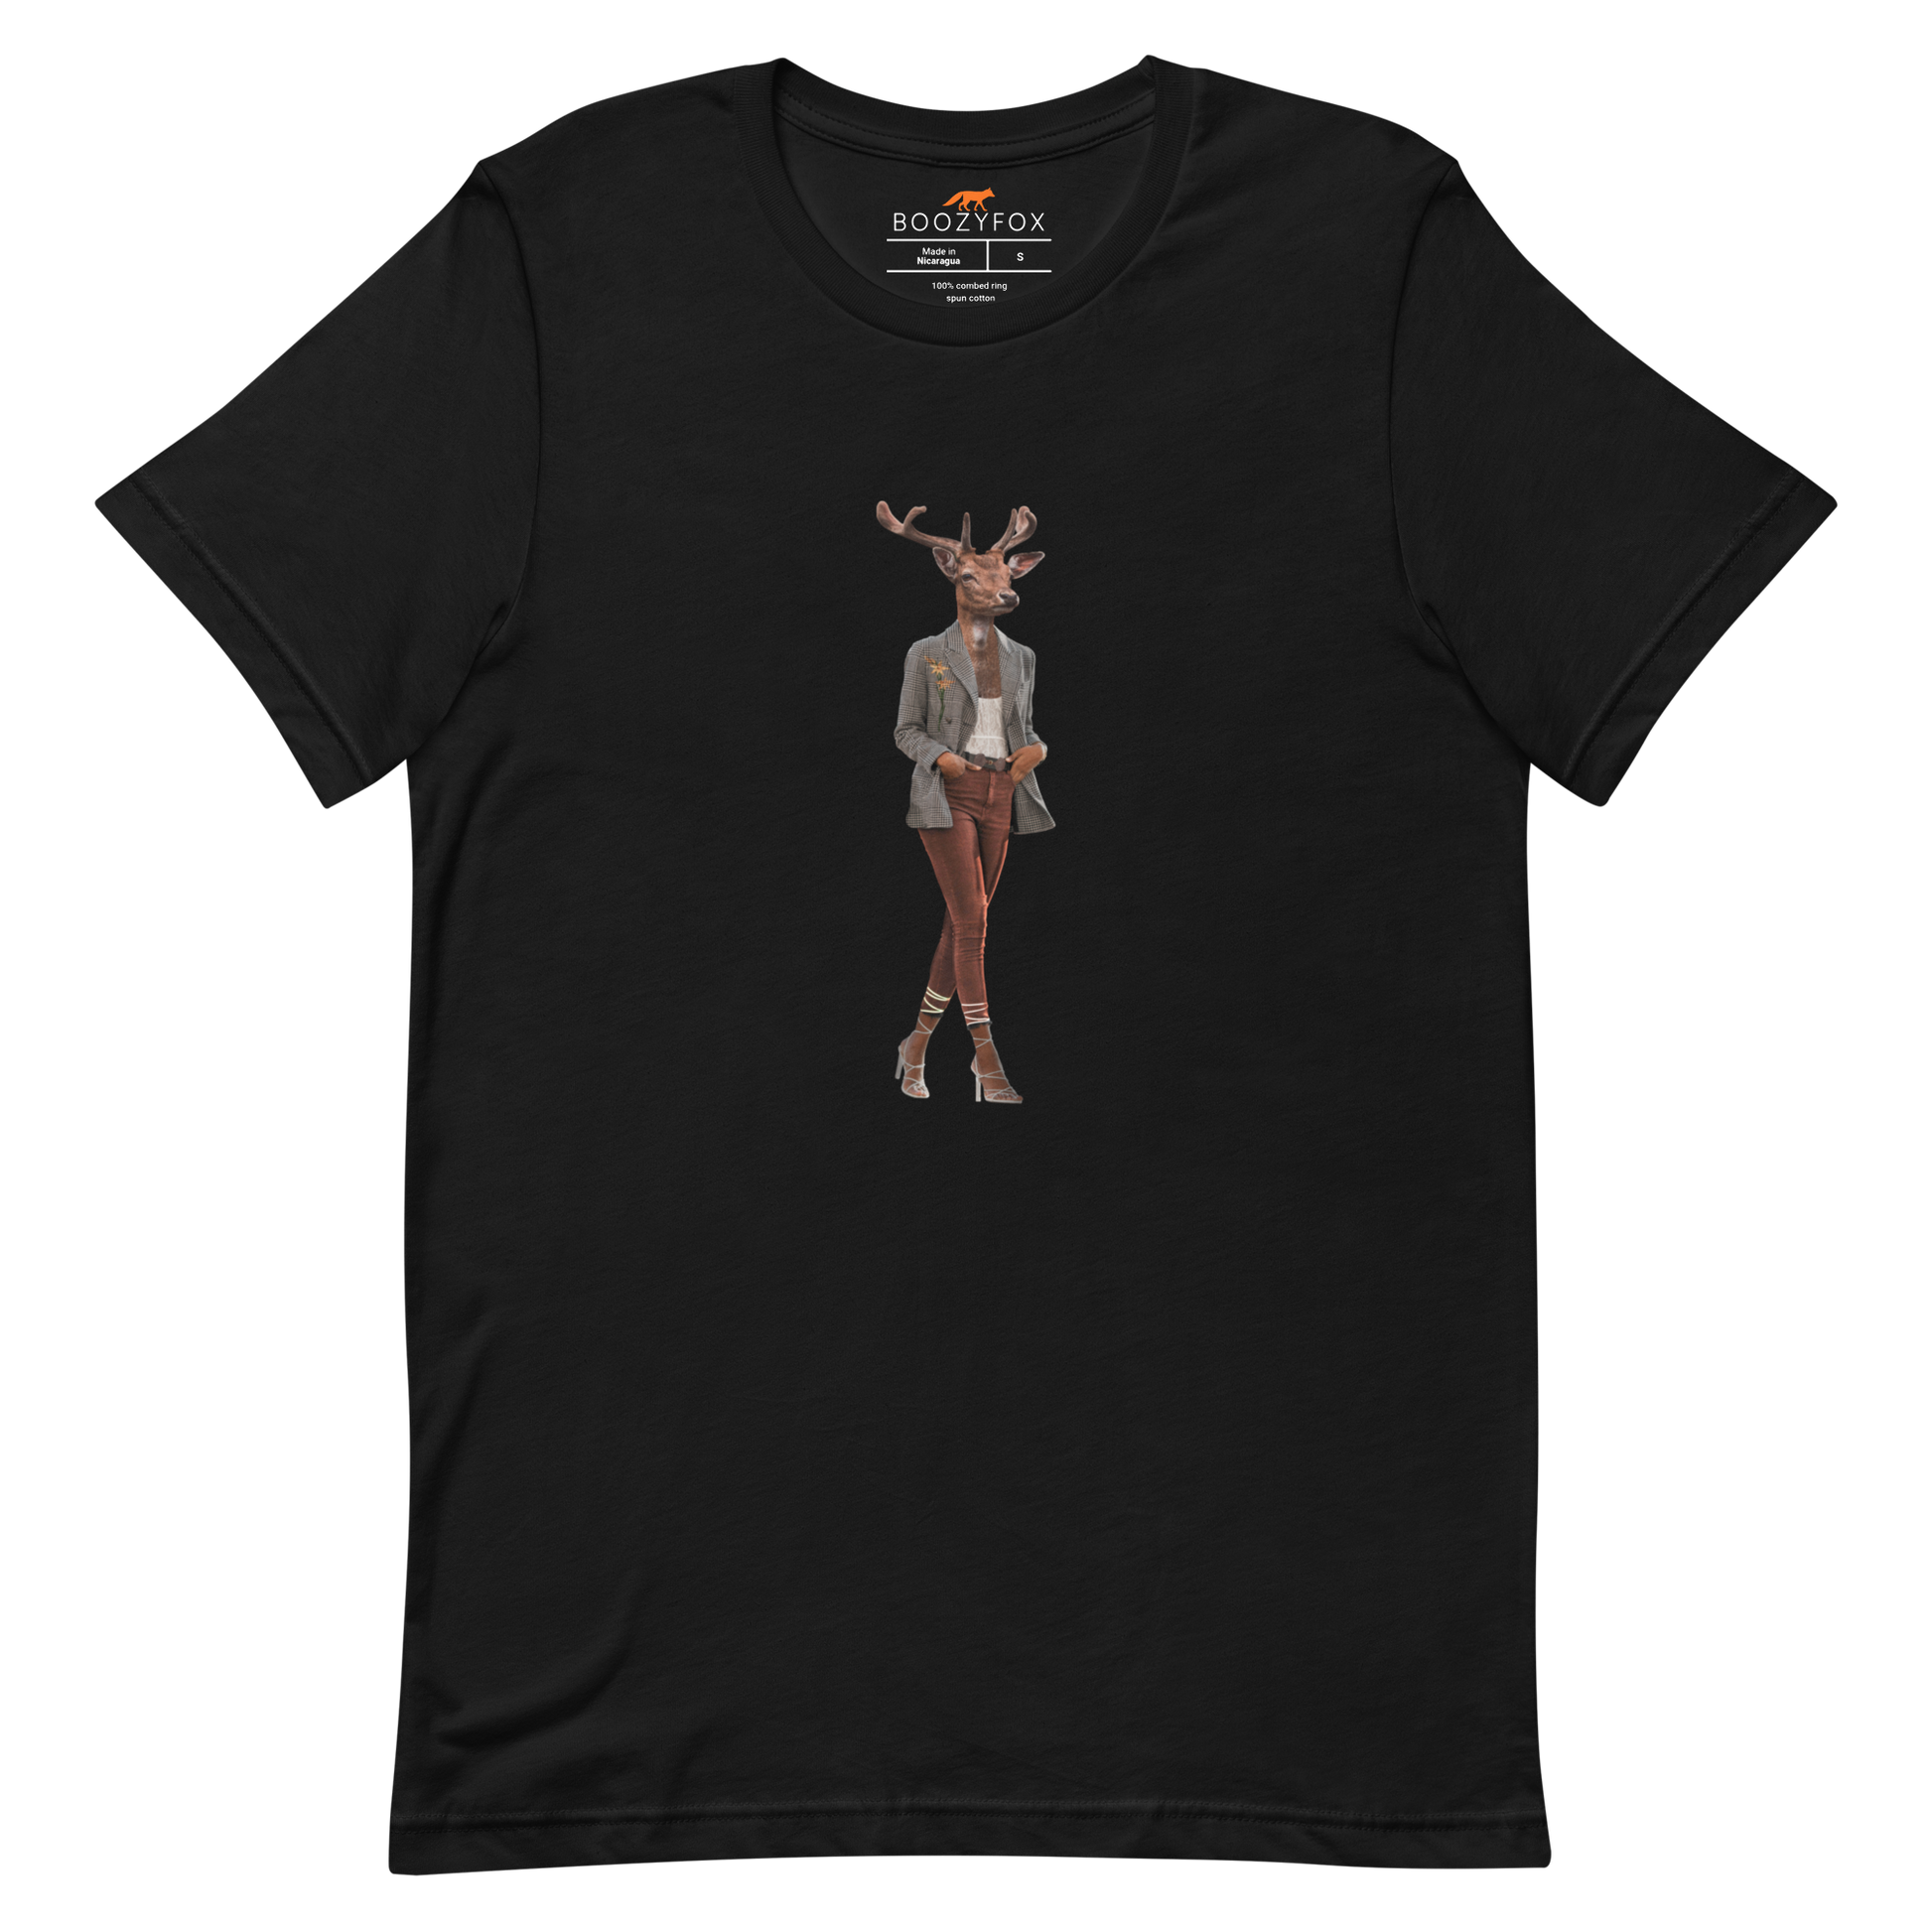 Black Premium Deer T-Shirt featuring an Anthropomorphic Deer graphic on the chest - Funny Graphic Deer Tees - Boozy Fox